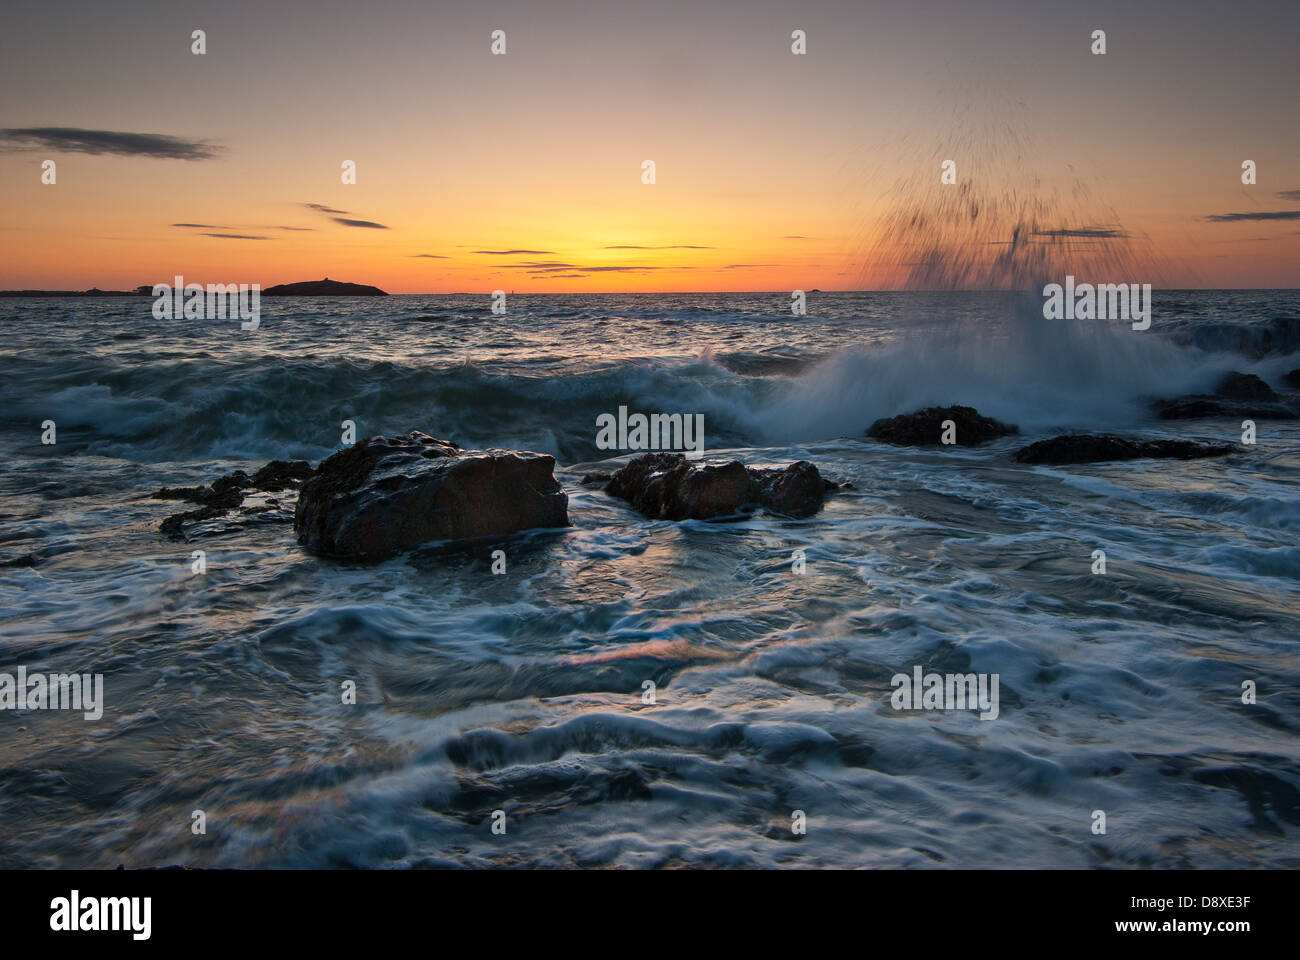 Waves crash and shoot into the air on a rocky beach at sunrise Stock Photo